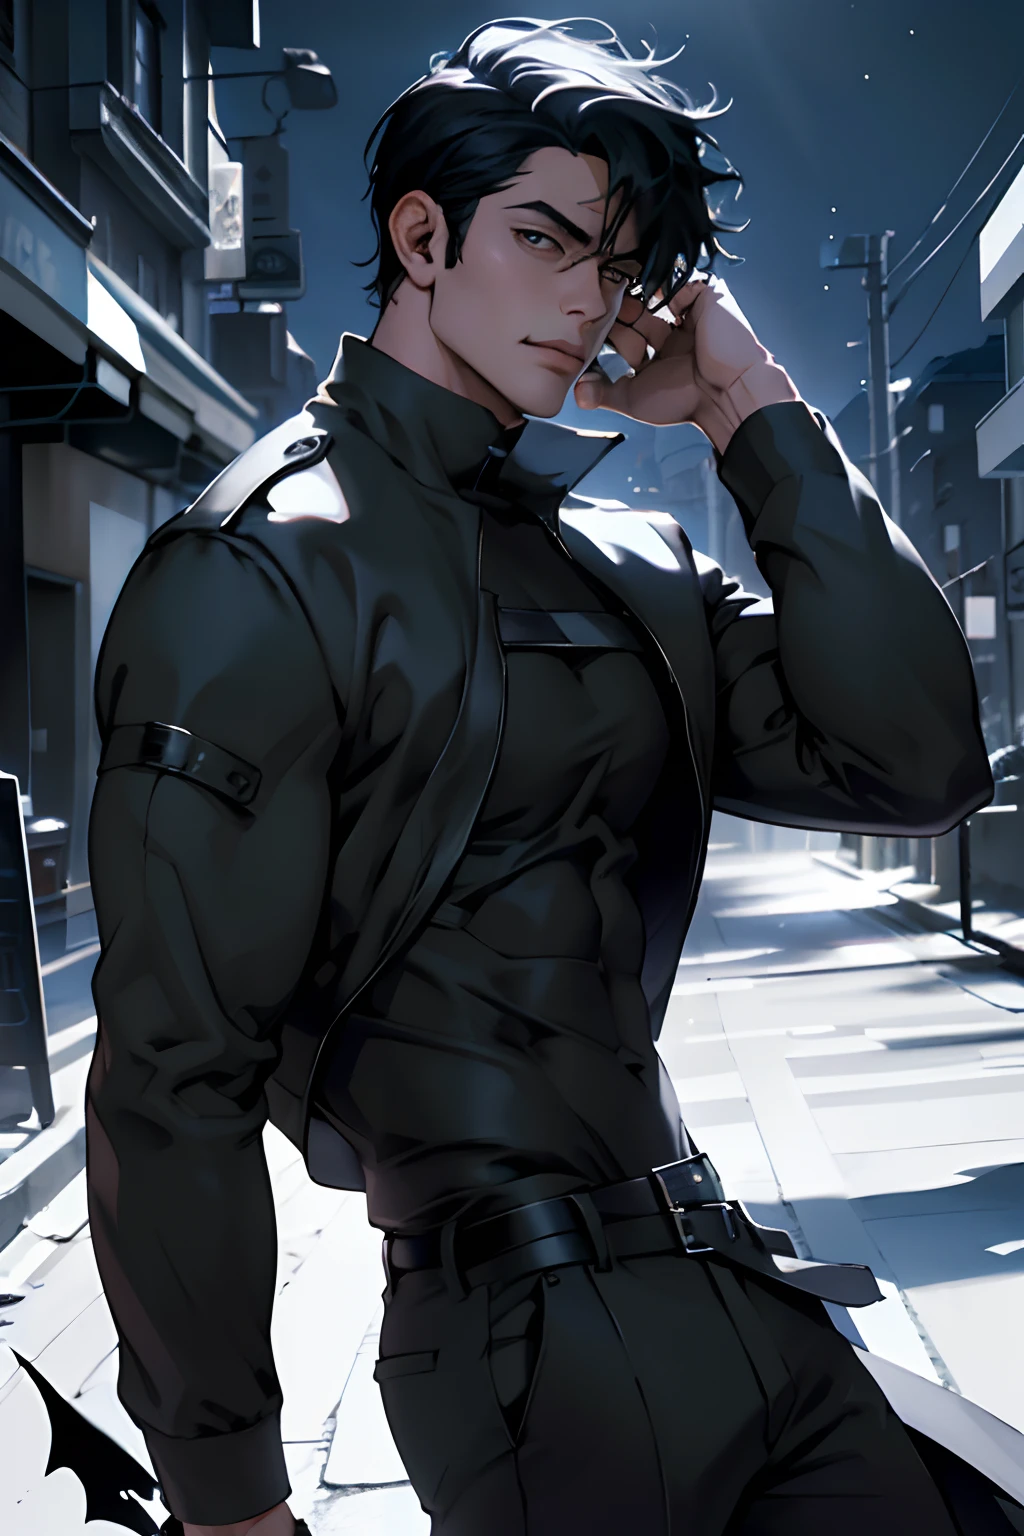 (absurdities, High resolution, ultra detailed), 1 man, handsome, high, muscular, 25 years old, short black hair, gray eyes, youthful hairstyle, manly seductive pose, En medio de una calle visctoriana vacia at night, terrifying environment, suspense environment, (black leather suit), wounded and bleeding, colorful, artistic, depth of field,8k, Hyperreal, 50mm, Kodak Portra 400, photograph by Martin Schoeller, natural light, Natural skin, Real skin texture, Foot fetish, An award-winning photographic portrait of a man, short black hair, a dark clalle in the background, Surreal decorated skin, masculine, whole body en movimiento, defined body, whole body, stunning realistic, sinister aura, horror background, Vampires, moustros, DEMONS, emanating a dark blue aura, RAW photograph, defined body,maximalismo, octane rendering, unreal, 8k, depth of field, bokeh, night background, at night, grey eyes, Face without hair, black ink, 8k, Hyperreal, 50mm, Kodak Portra 400, photograph by Martin Schoeller, natural light, Natural skin, Real skin texture, Foot fetish